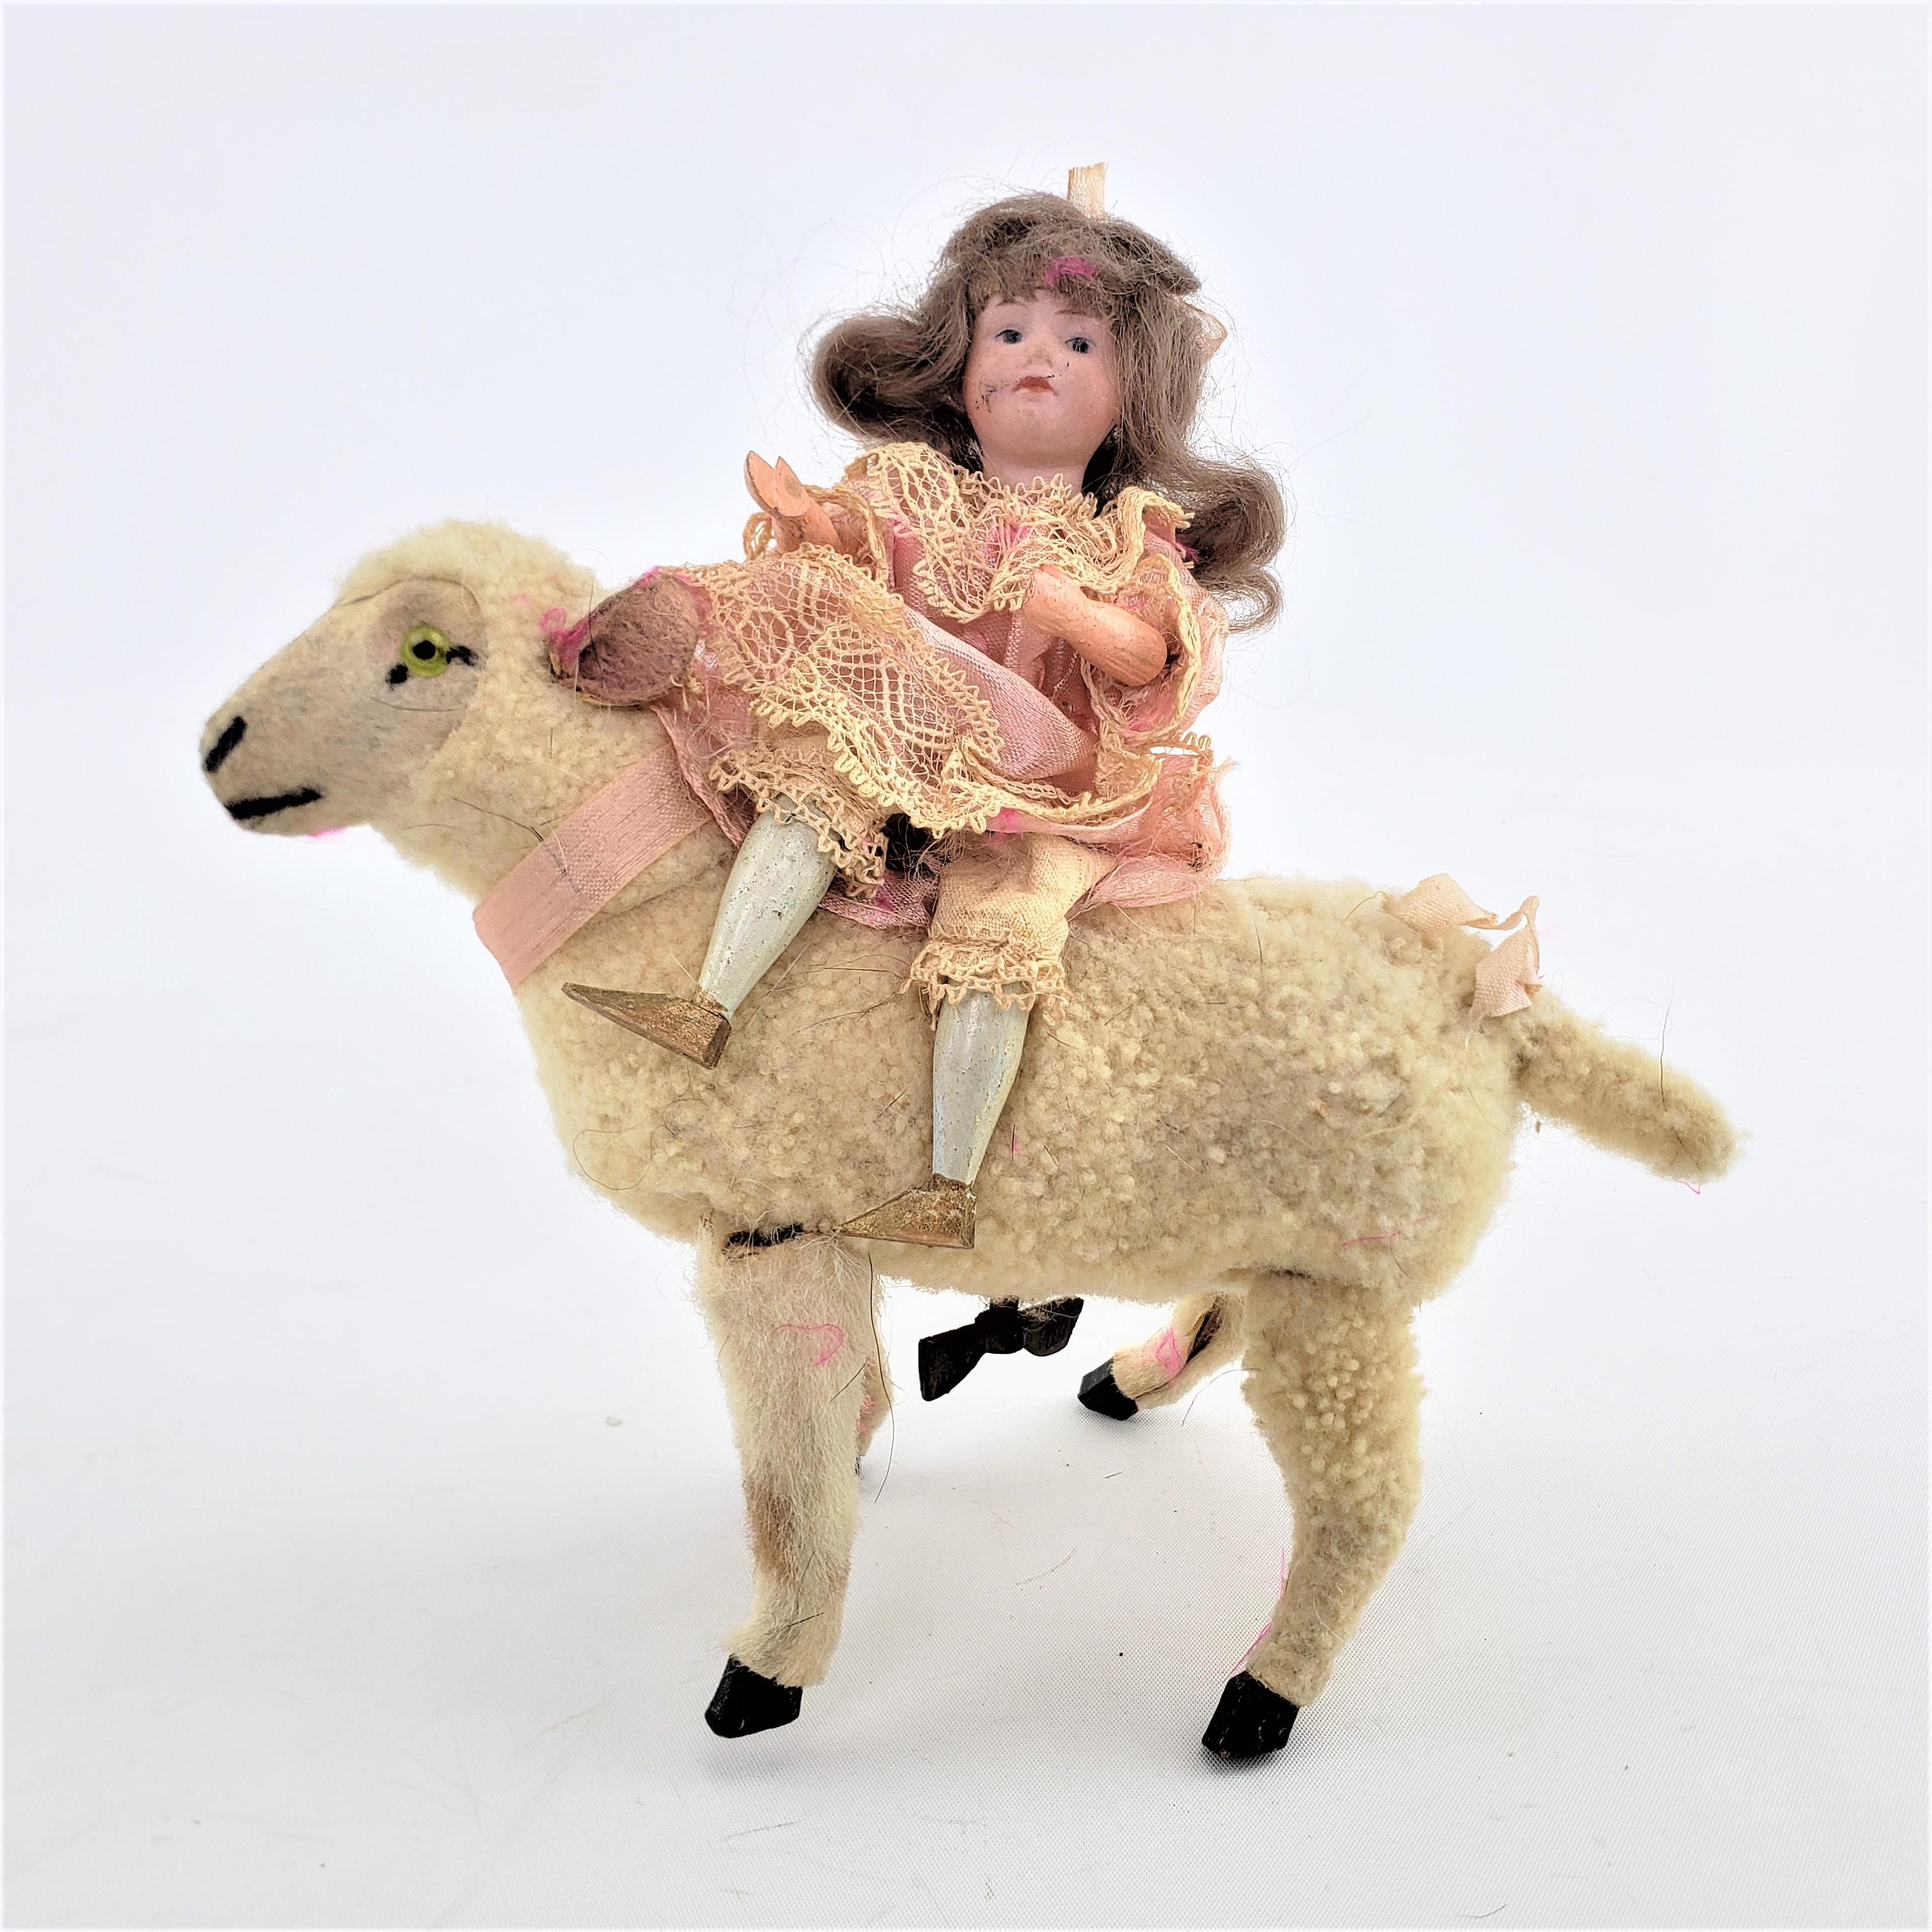 This antique mechanical toy is unsigned, but presumed to have been made in Europe, possibly England or Austria in approximately 1880 and done in the period Victorian style. The toy features a toy mechanical lamb, with a young girl in formal sild